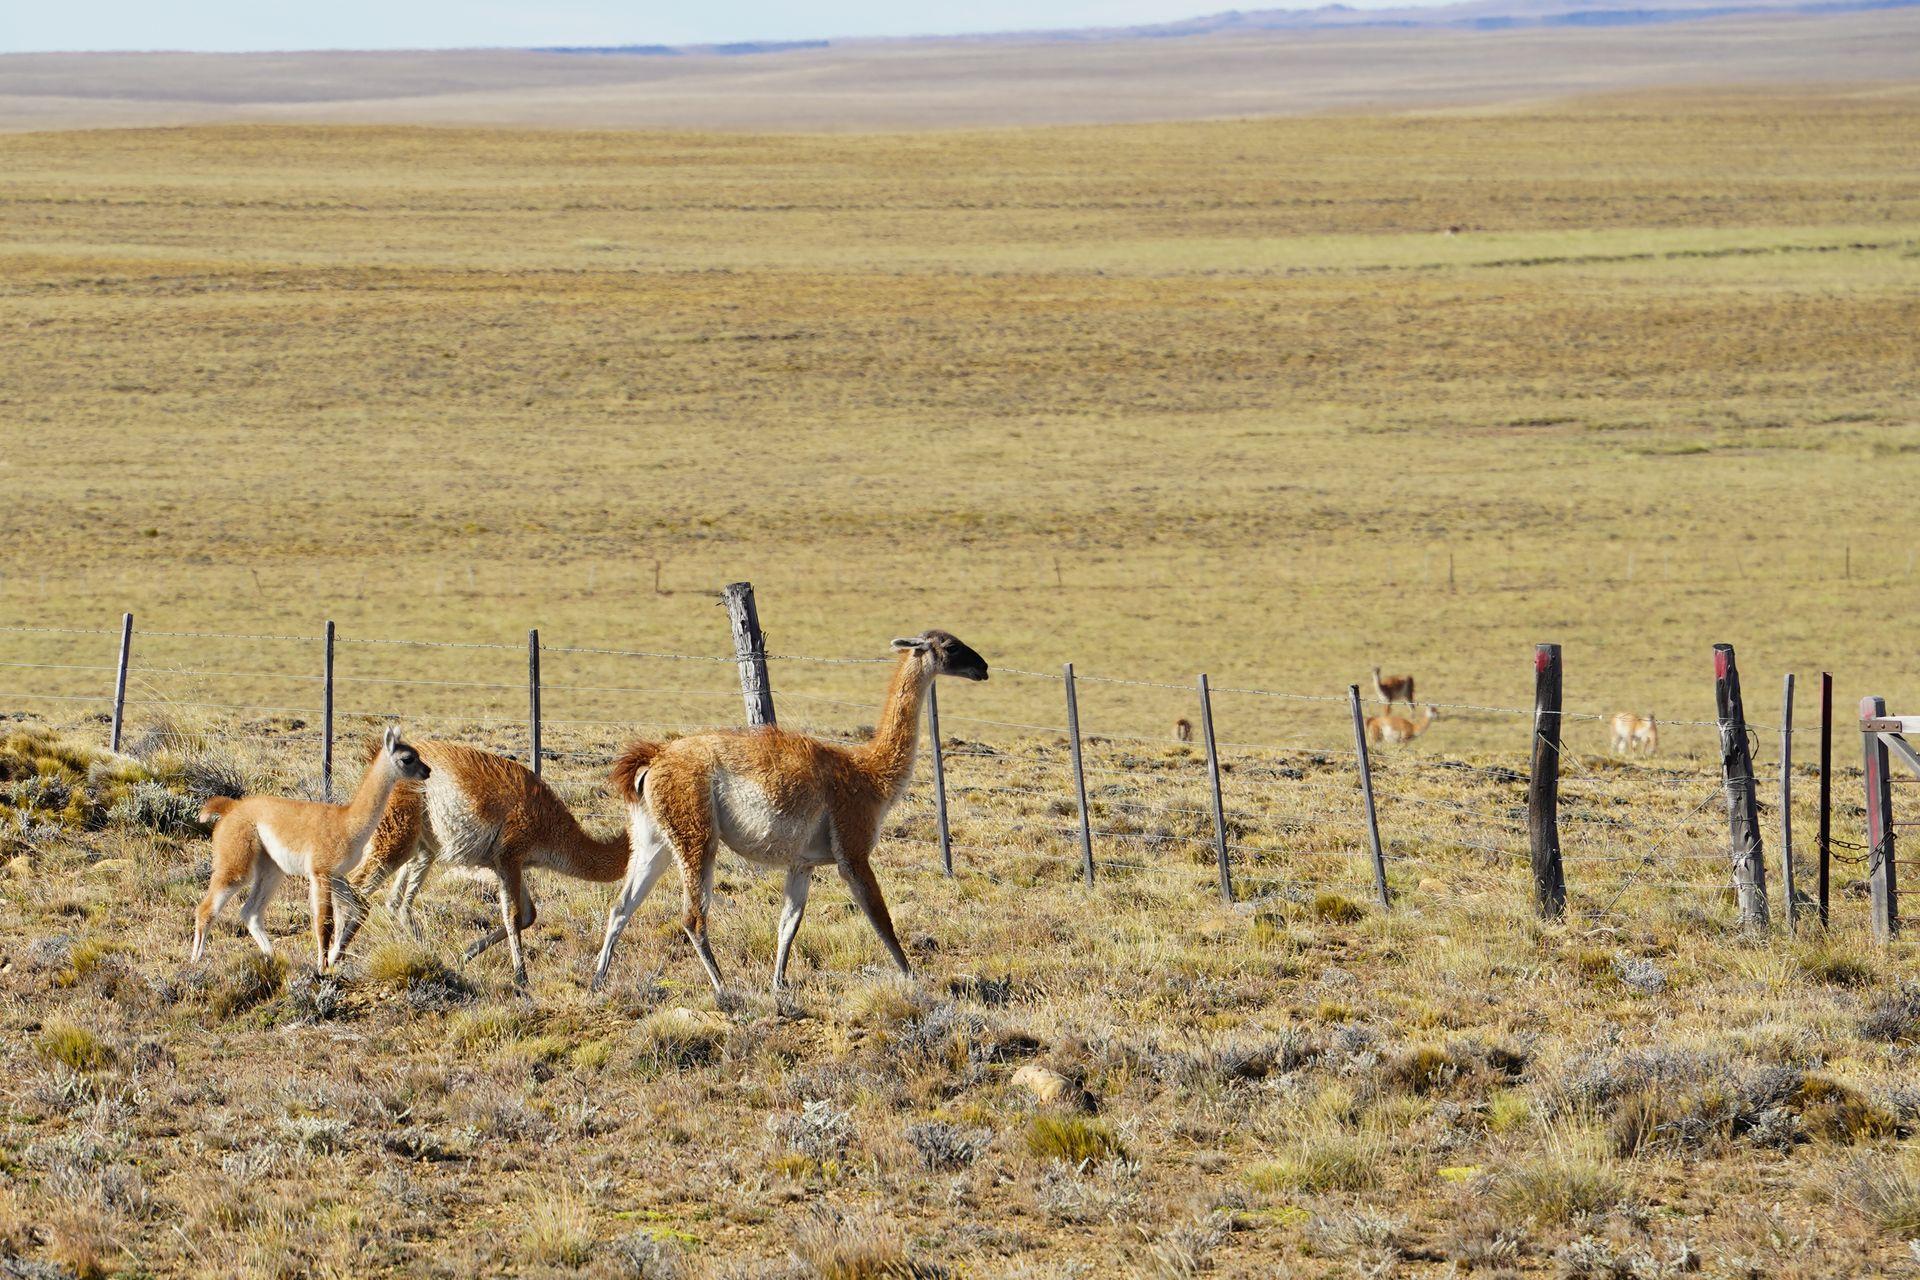 A group of a few guanacos tropping along the roading during a drive in Patagonia.